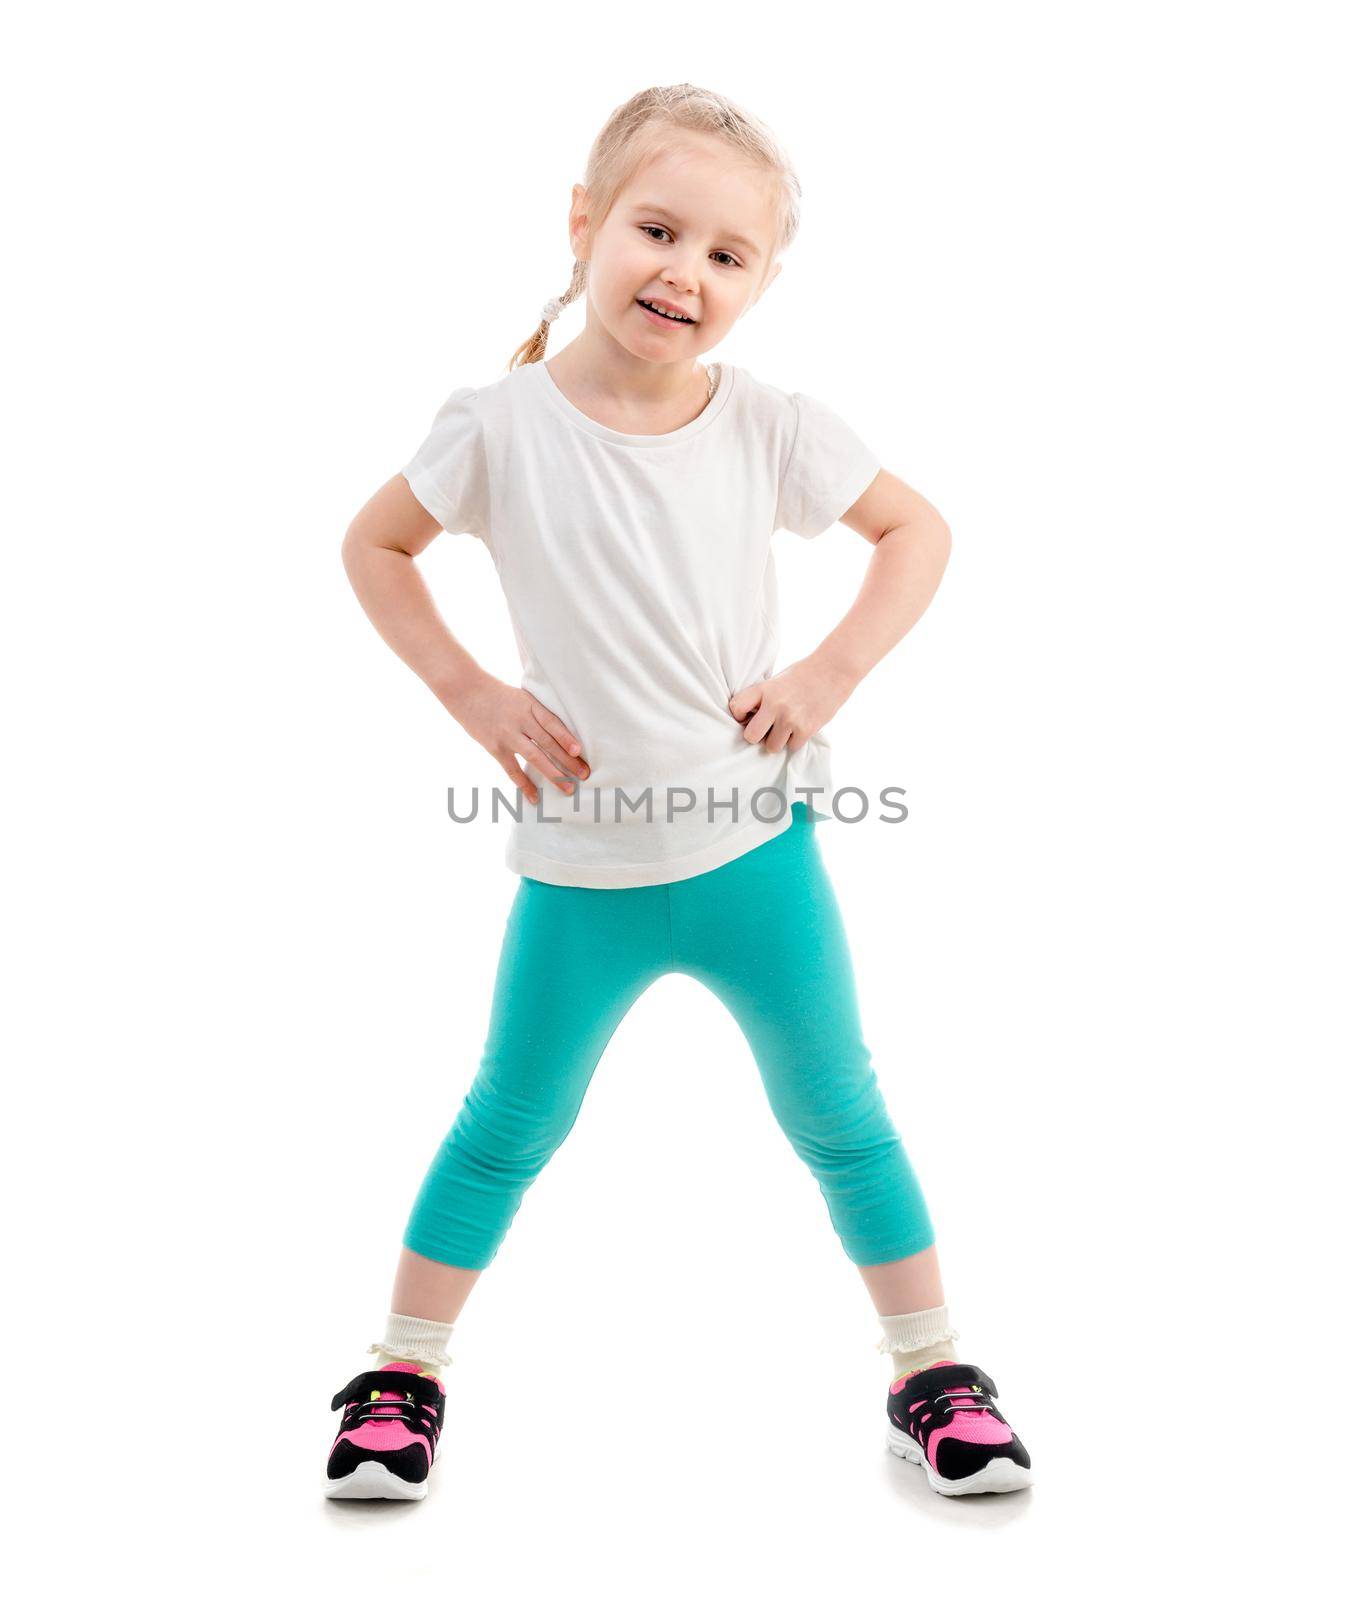 Child in sportswear, isolated on white background by tan4ikk1